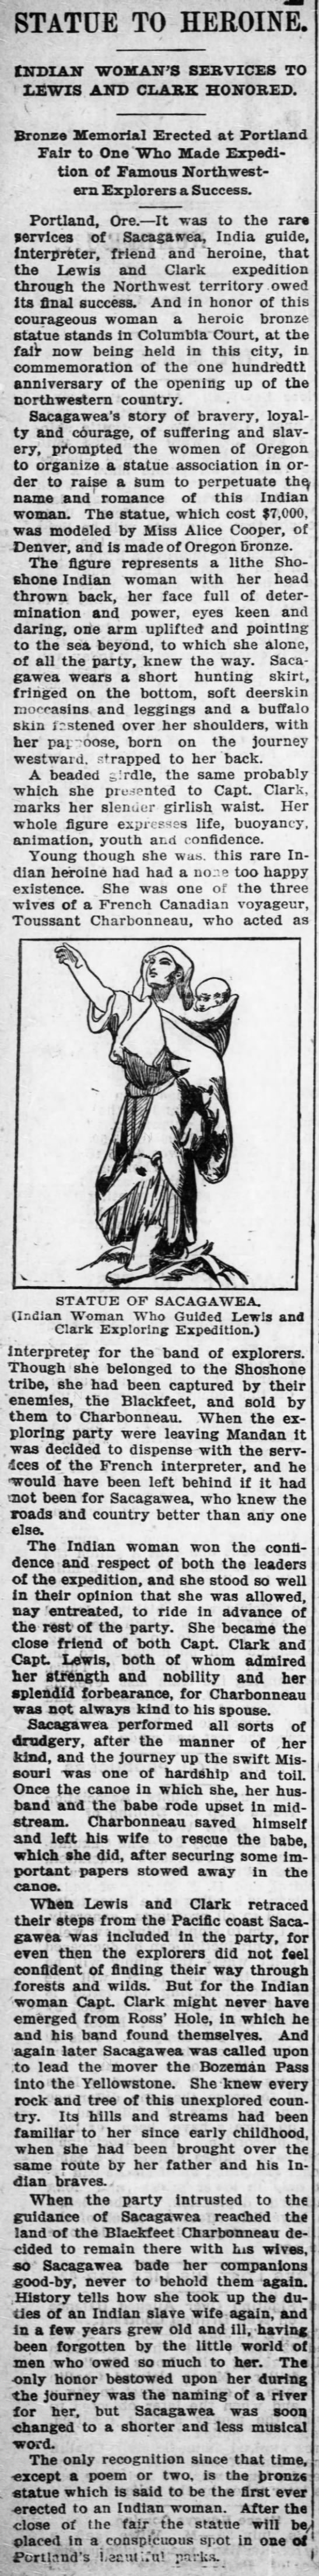 Statue honoring Sacagawea, Lewis and Clark's guide during their expedition - 